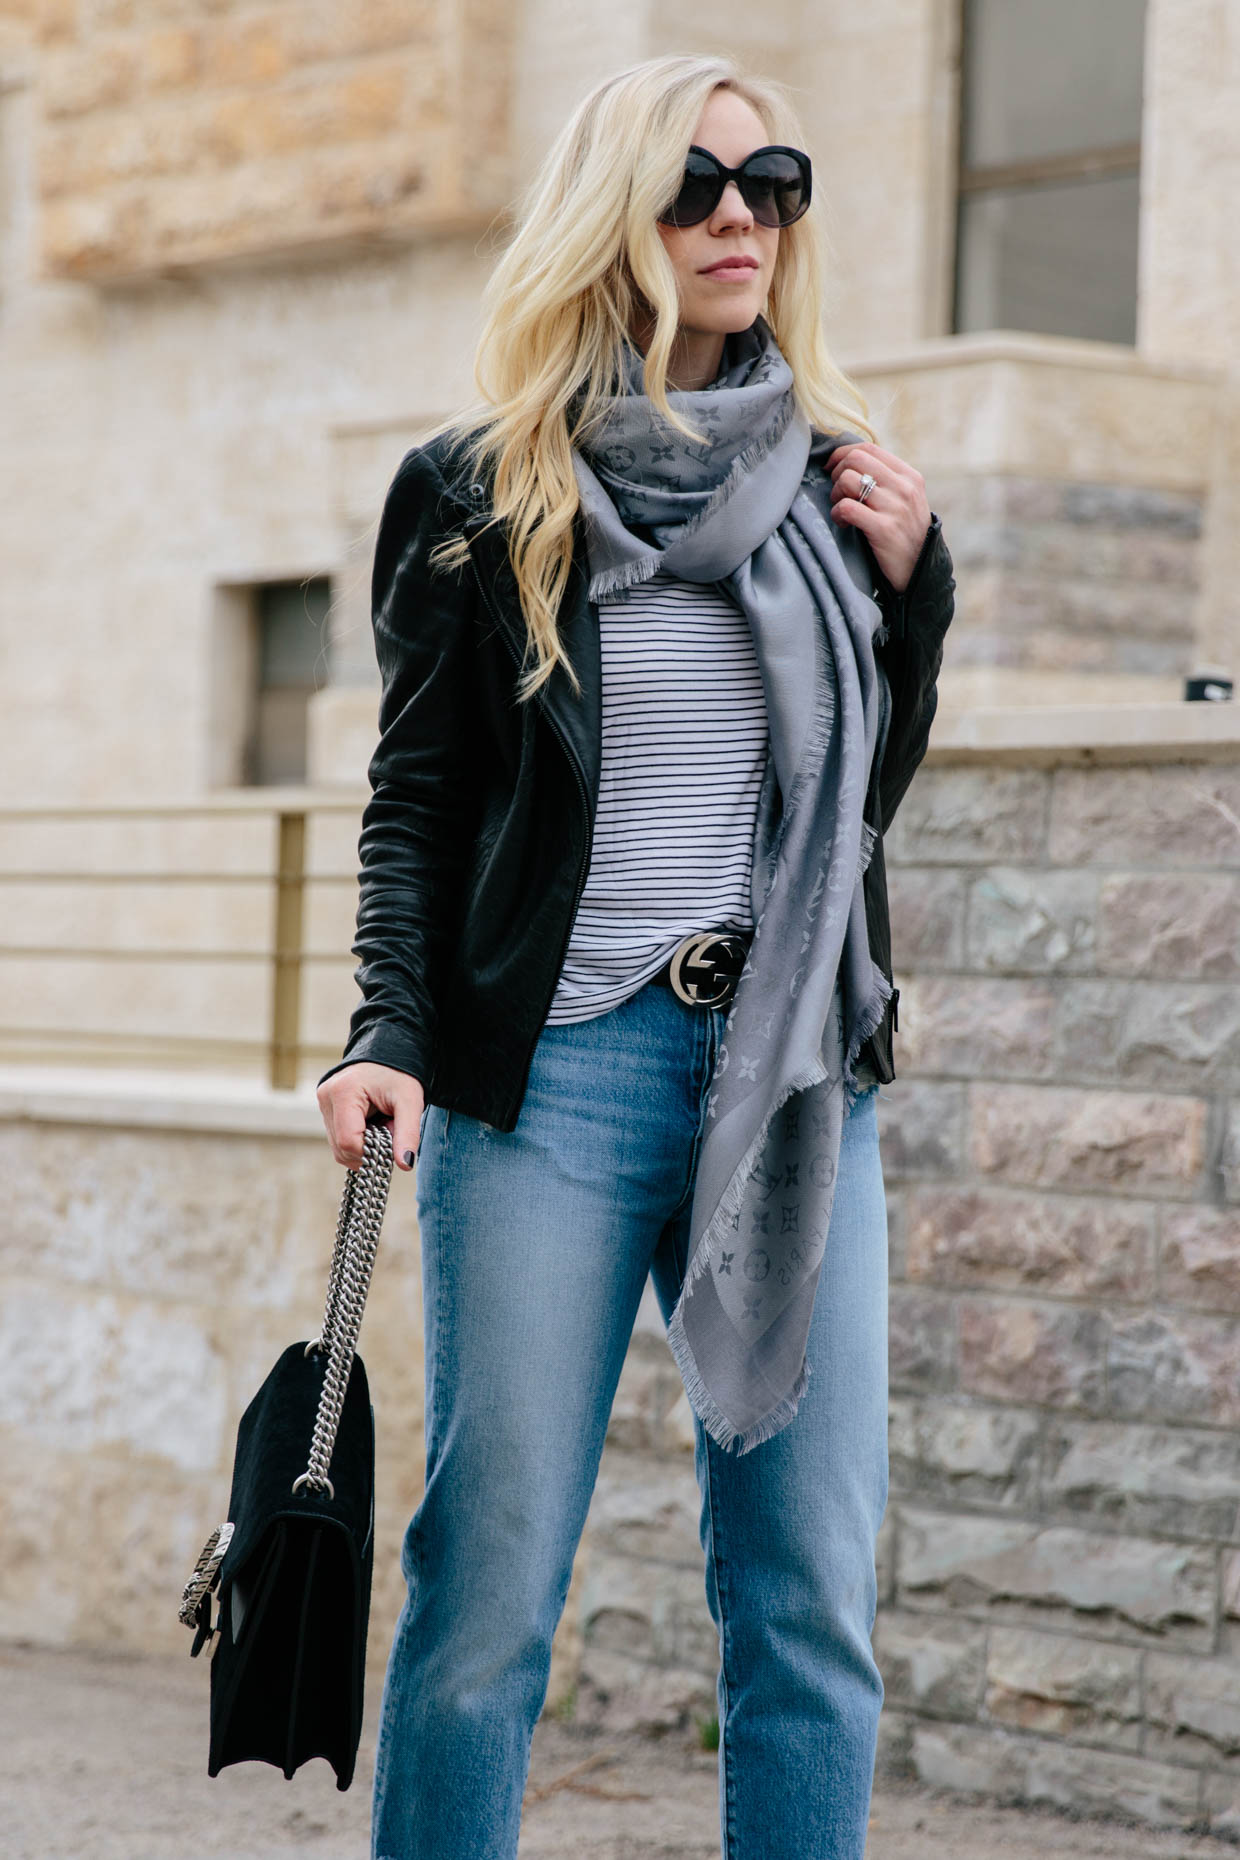 All-Season Layered Look with a Leather Jacket & Straight Leg Jeans